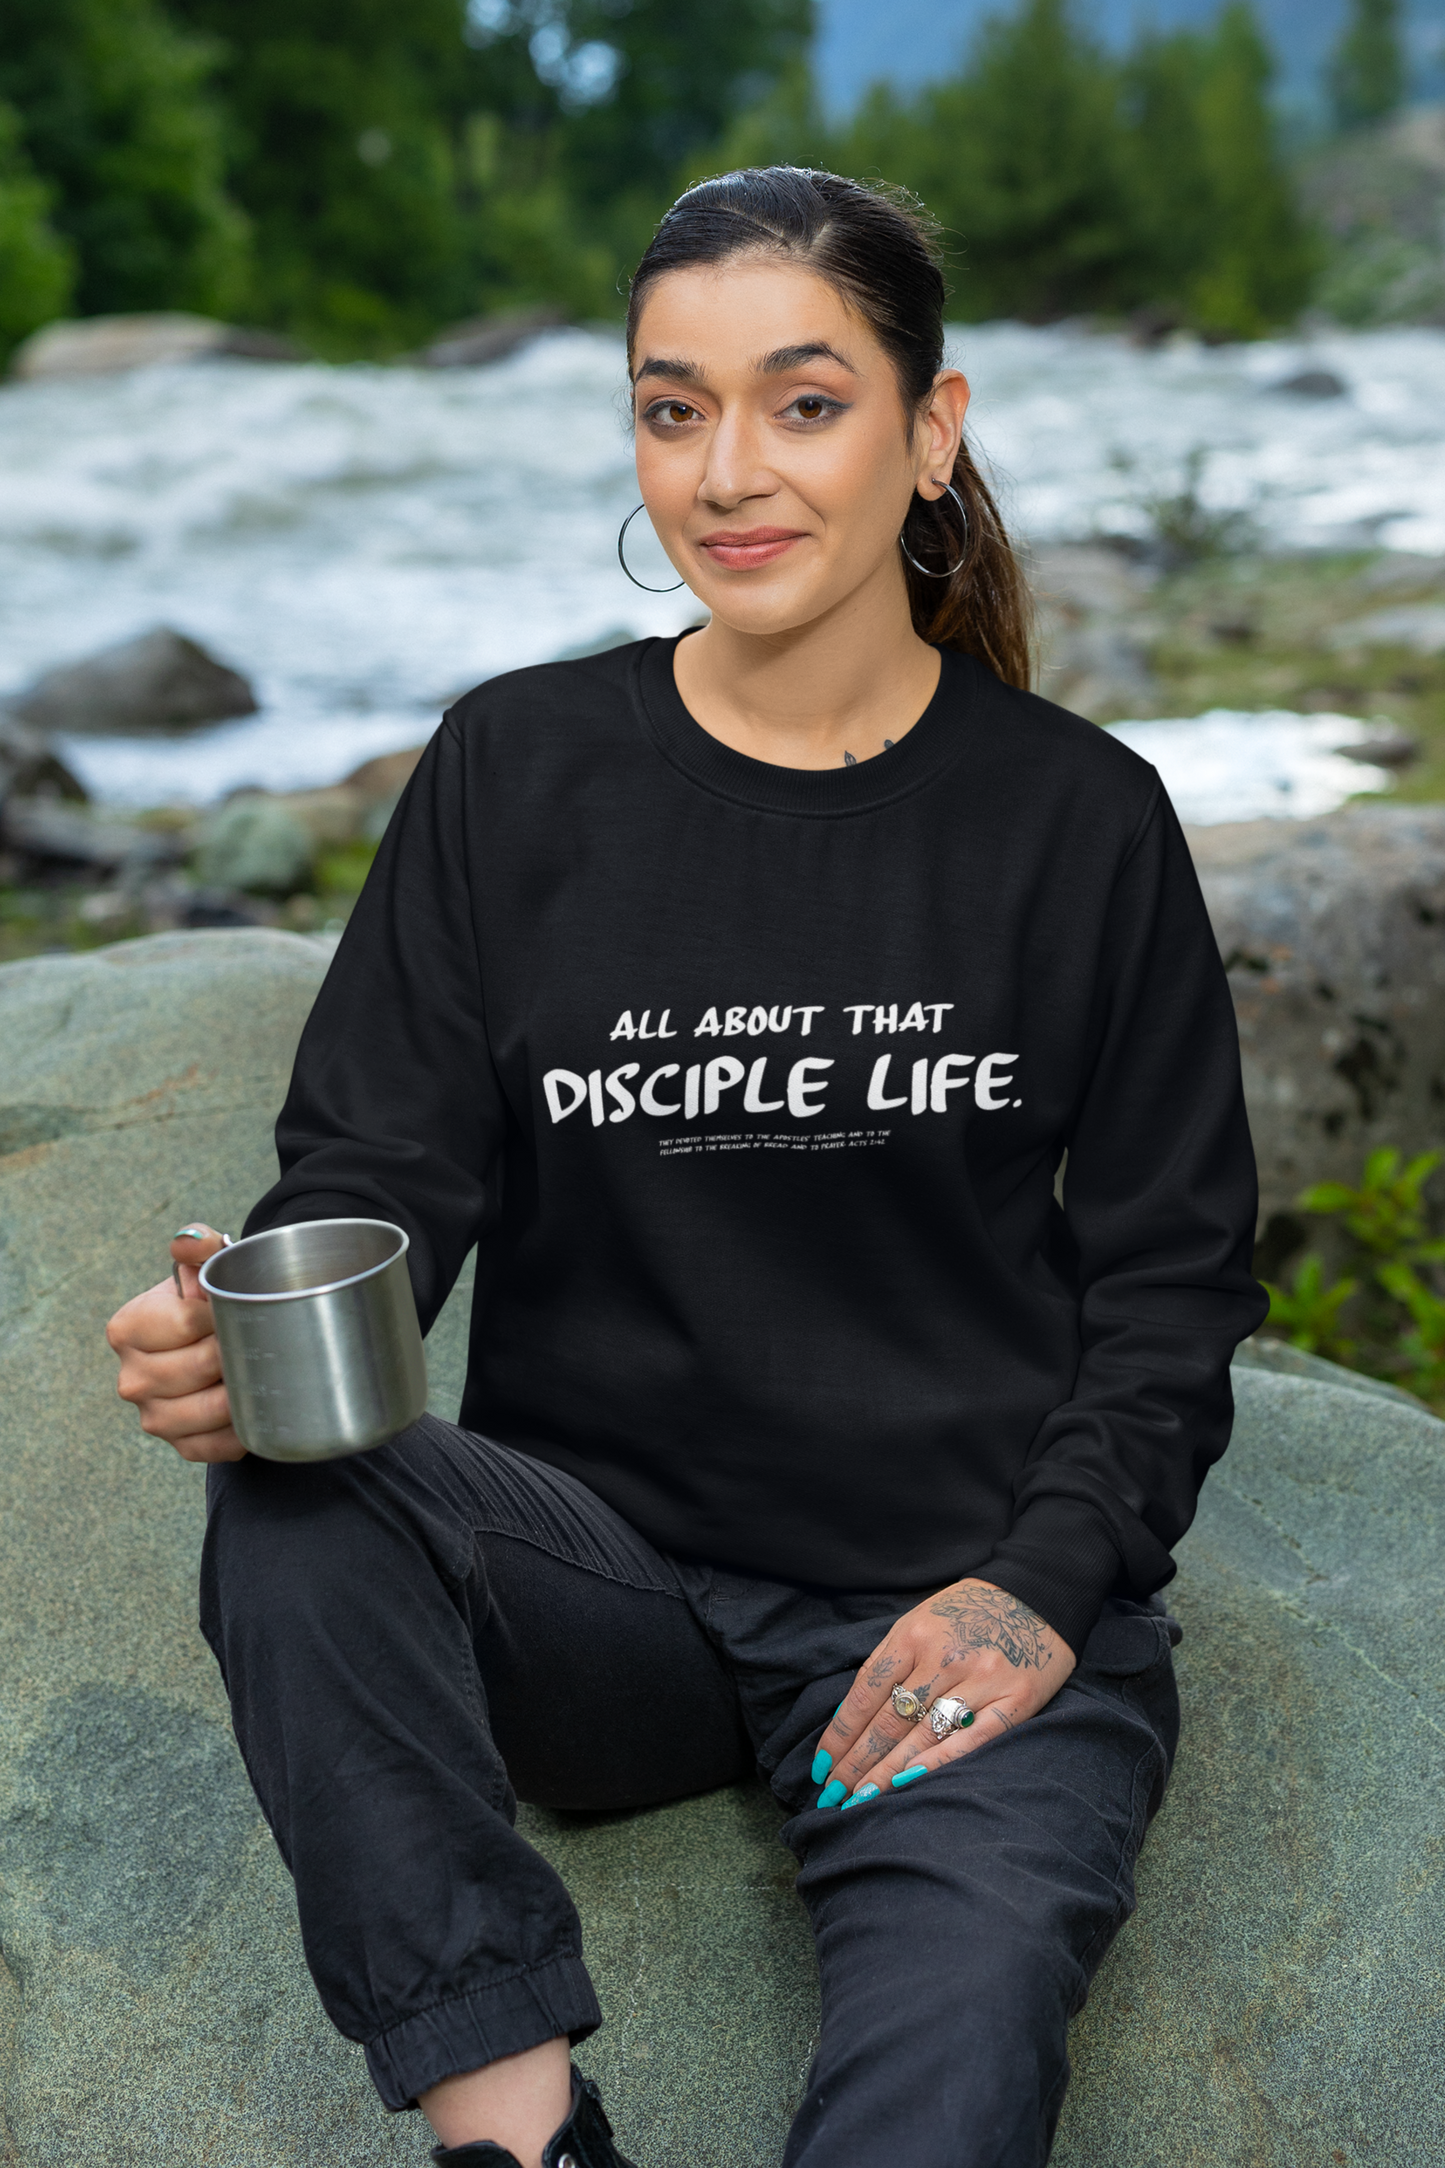 All About that Disciple Life. Sweatshirt.